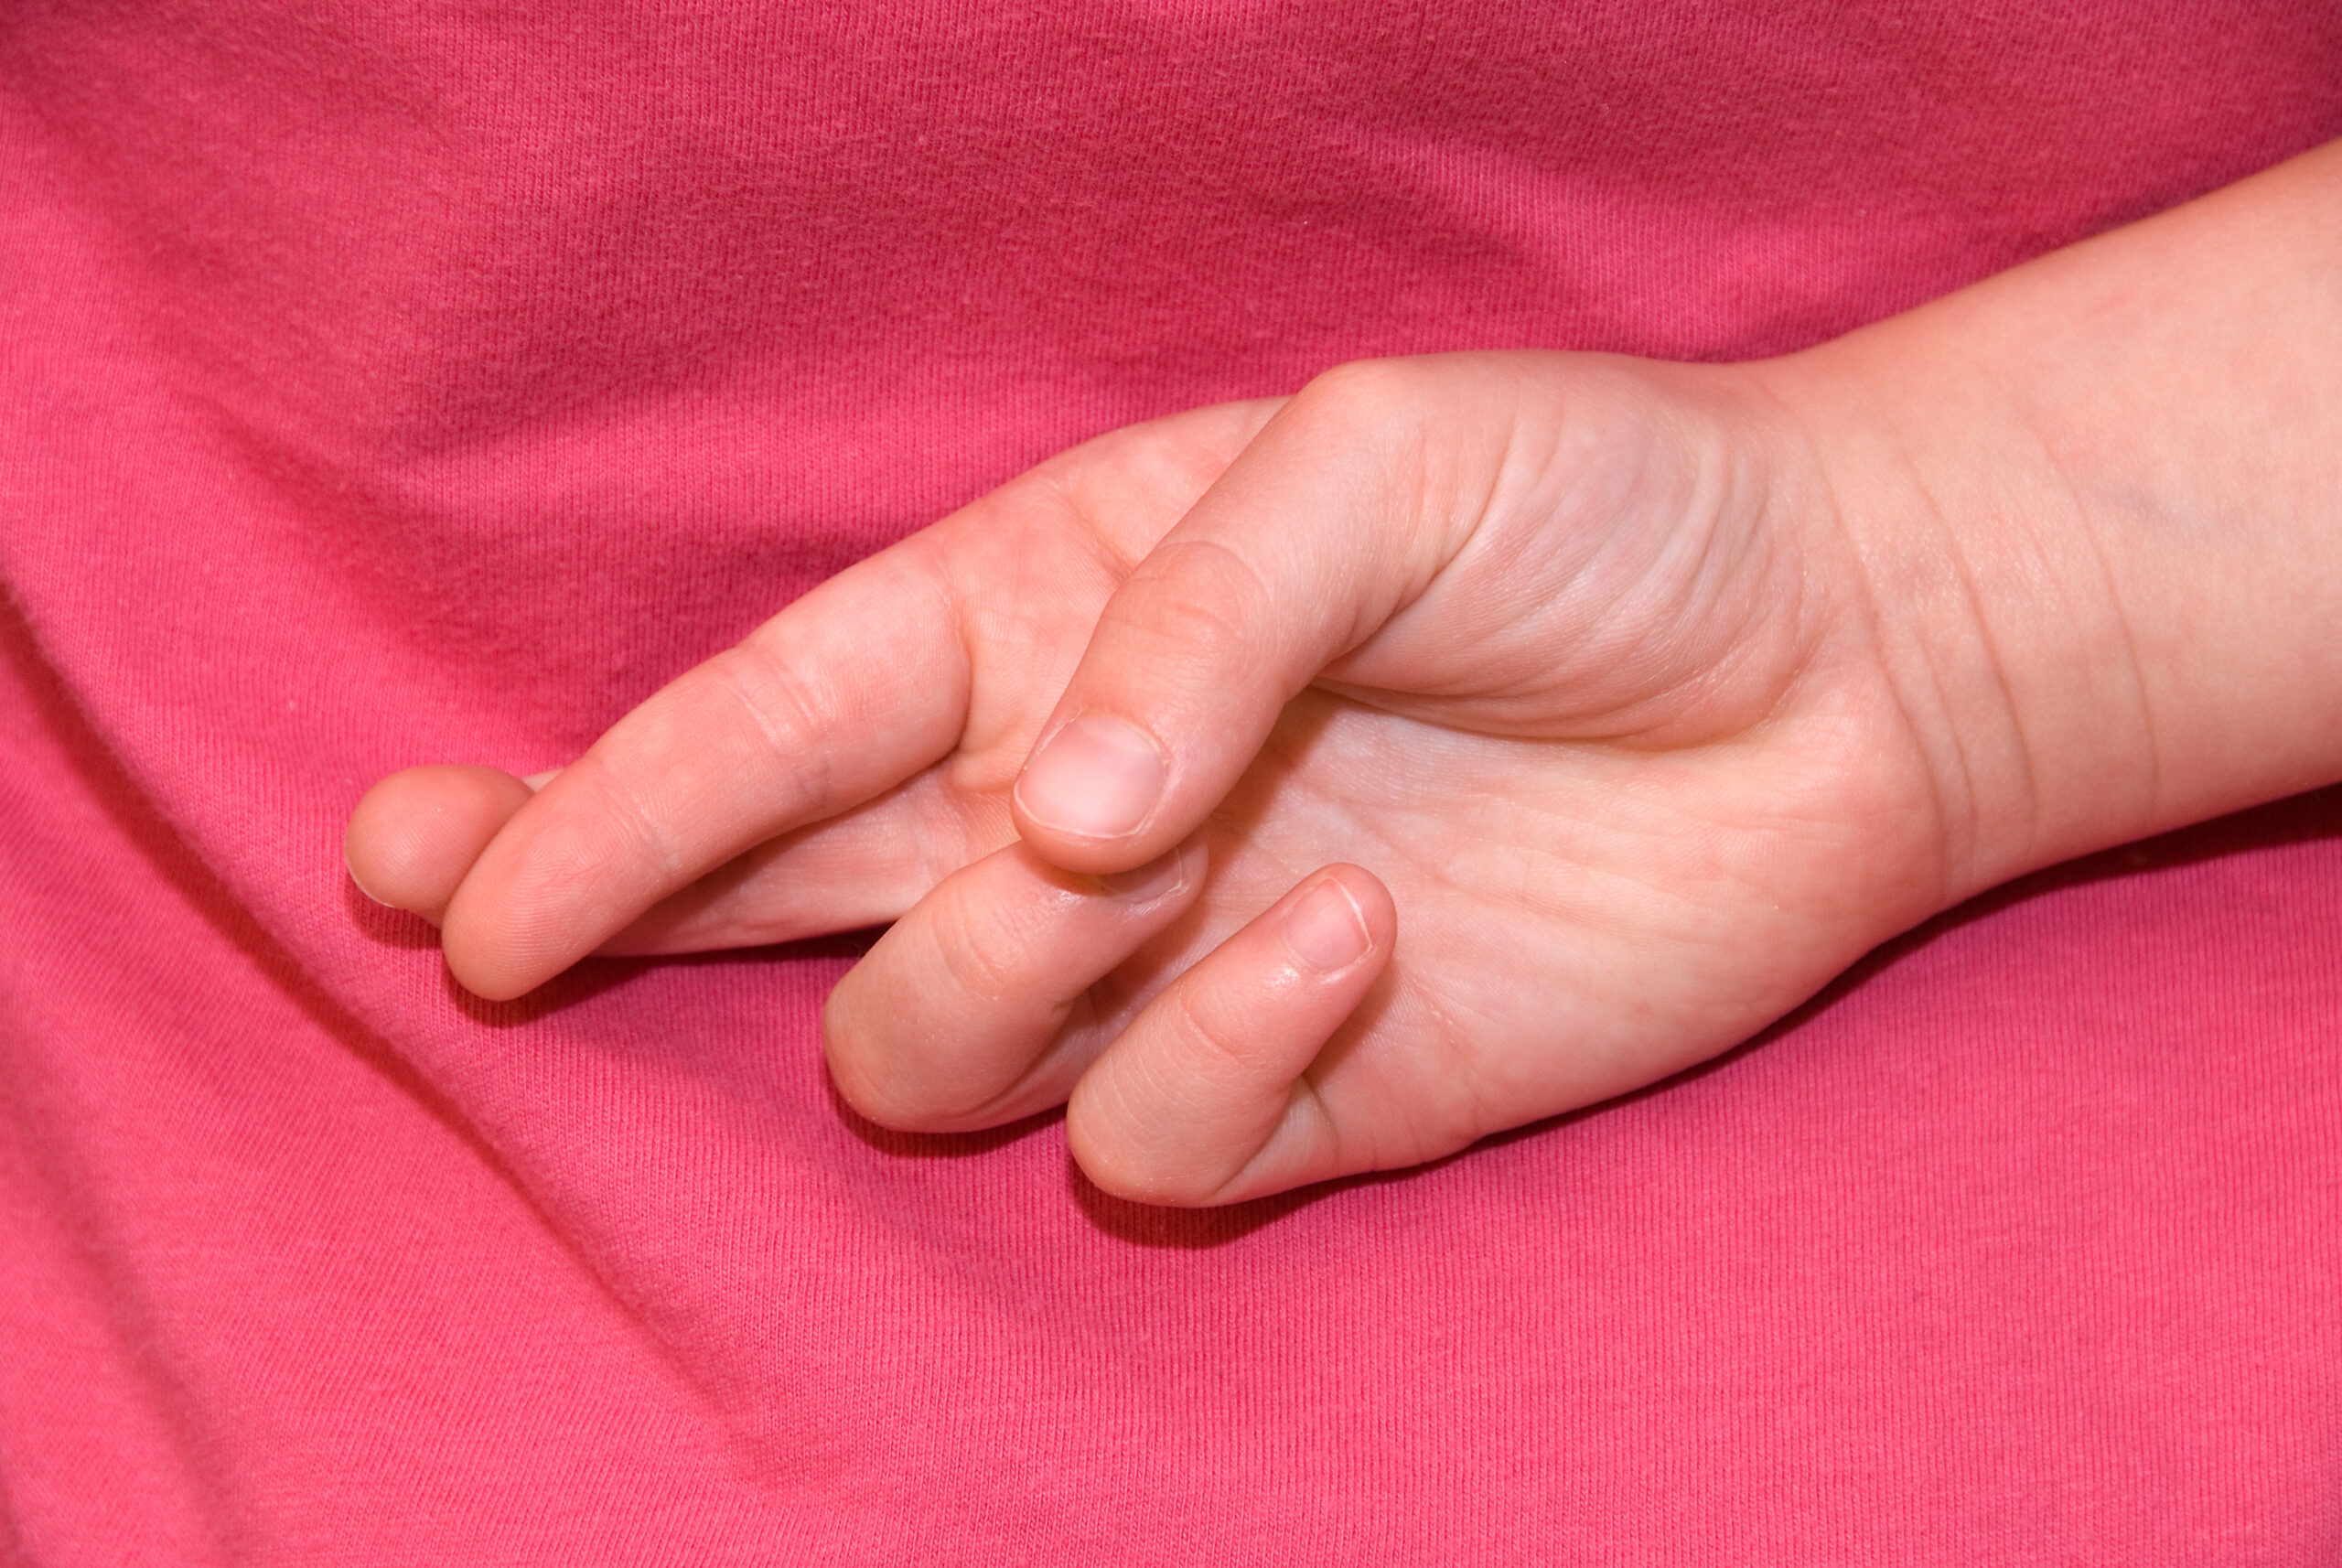 a hand crosses its middle and forefingers against a pink cloth backdrop